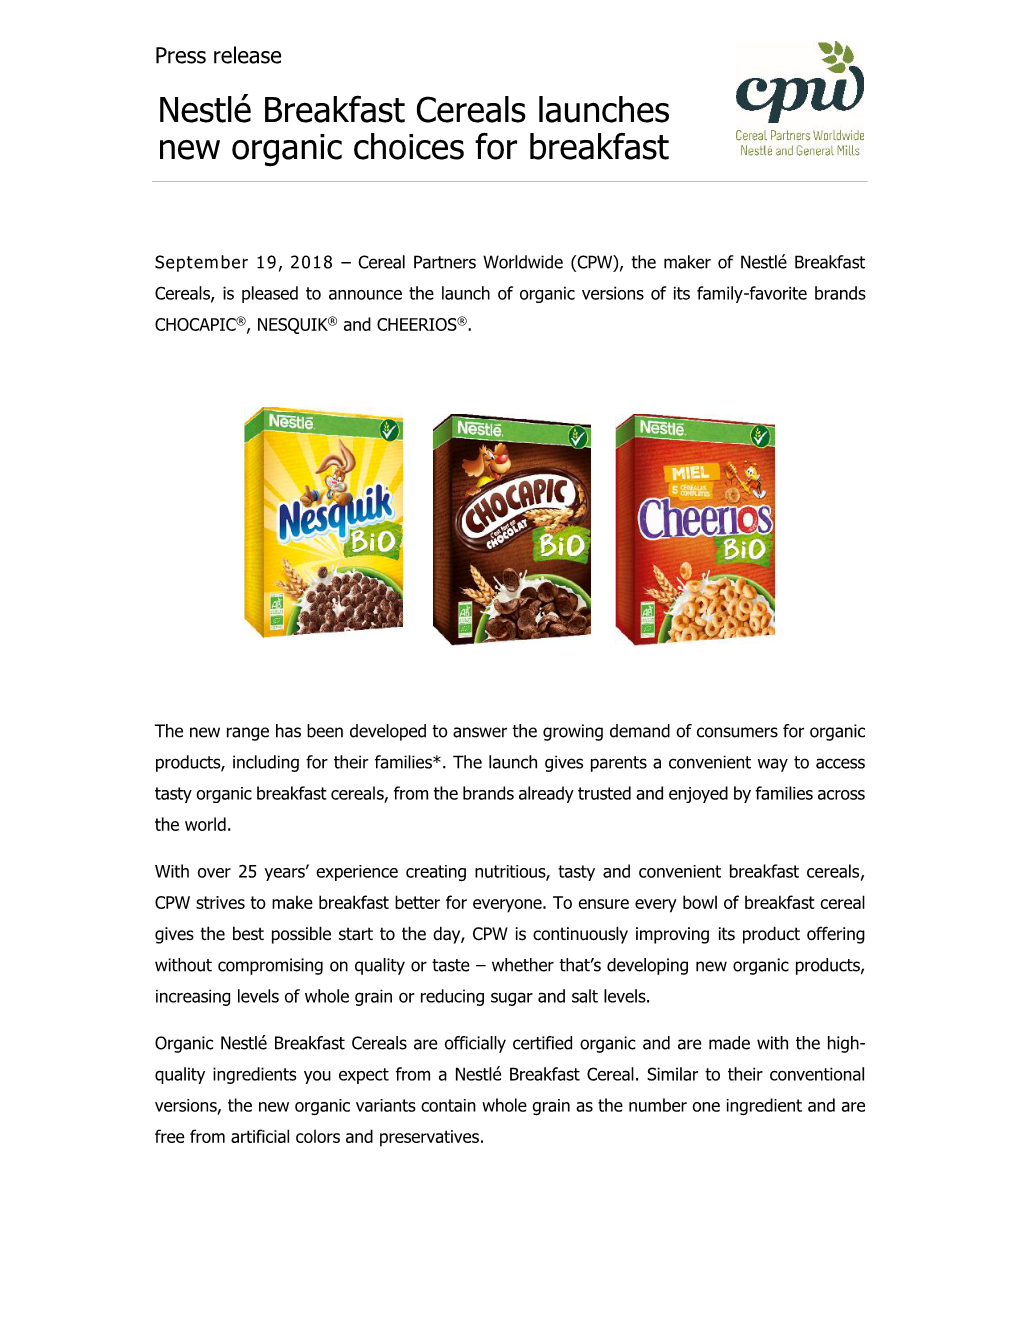 Nestlé Breakfast Cereals Launches New Organic Choices for Breakfast